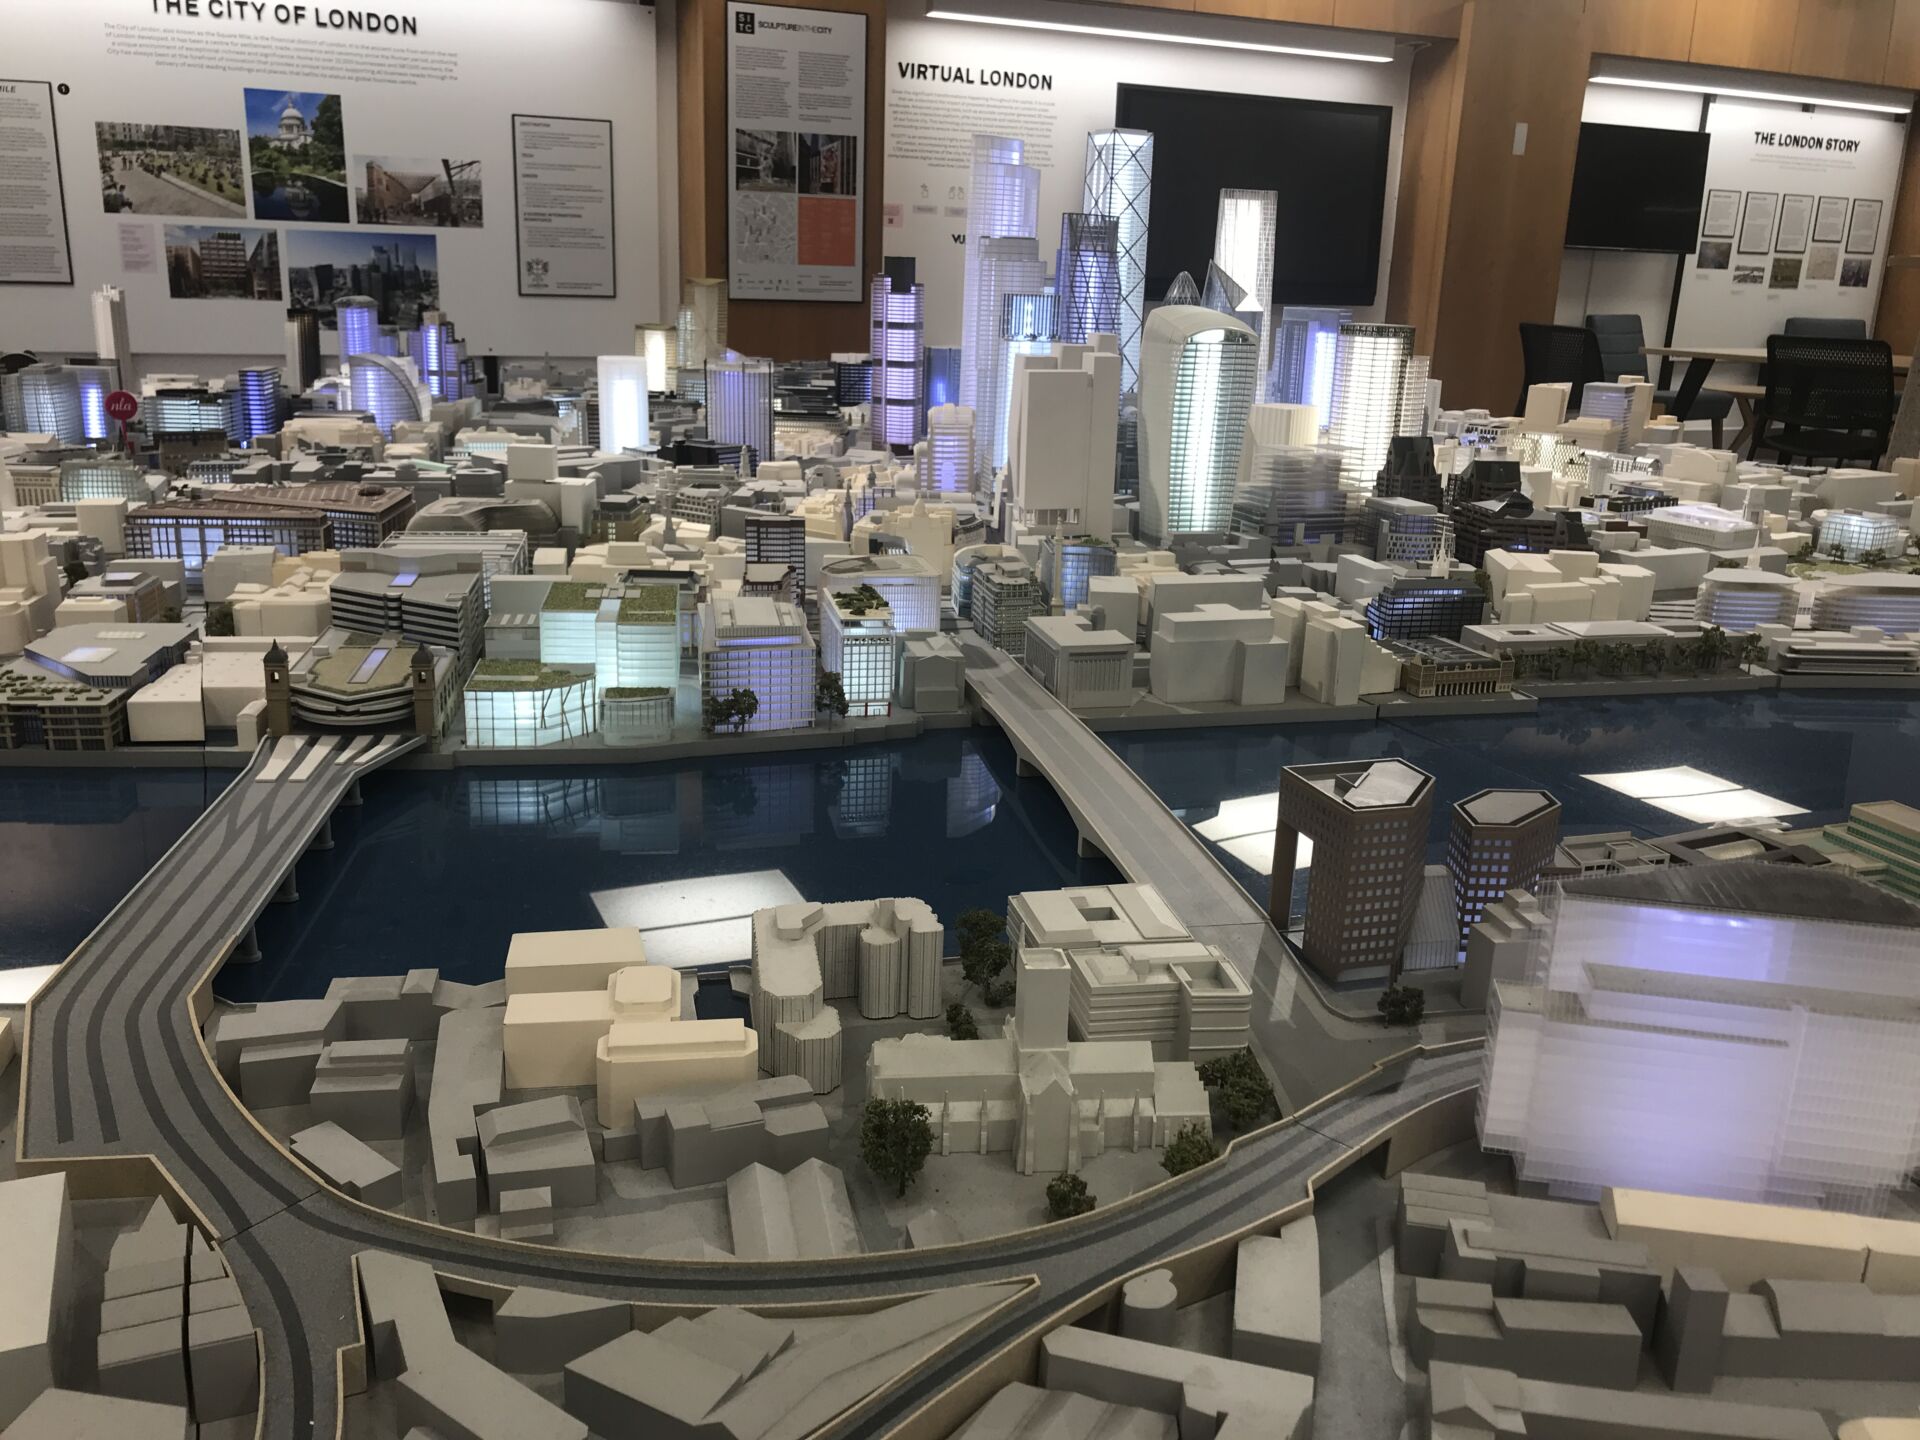 City of London Model. Photo Credit: © Don Brown.